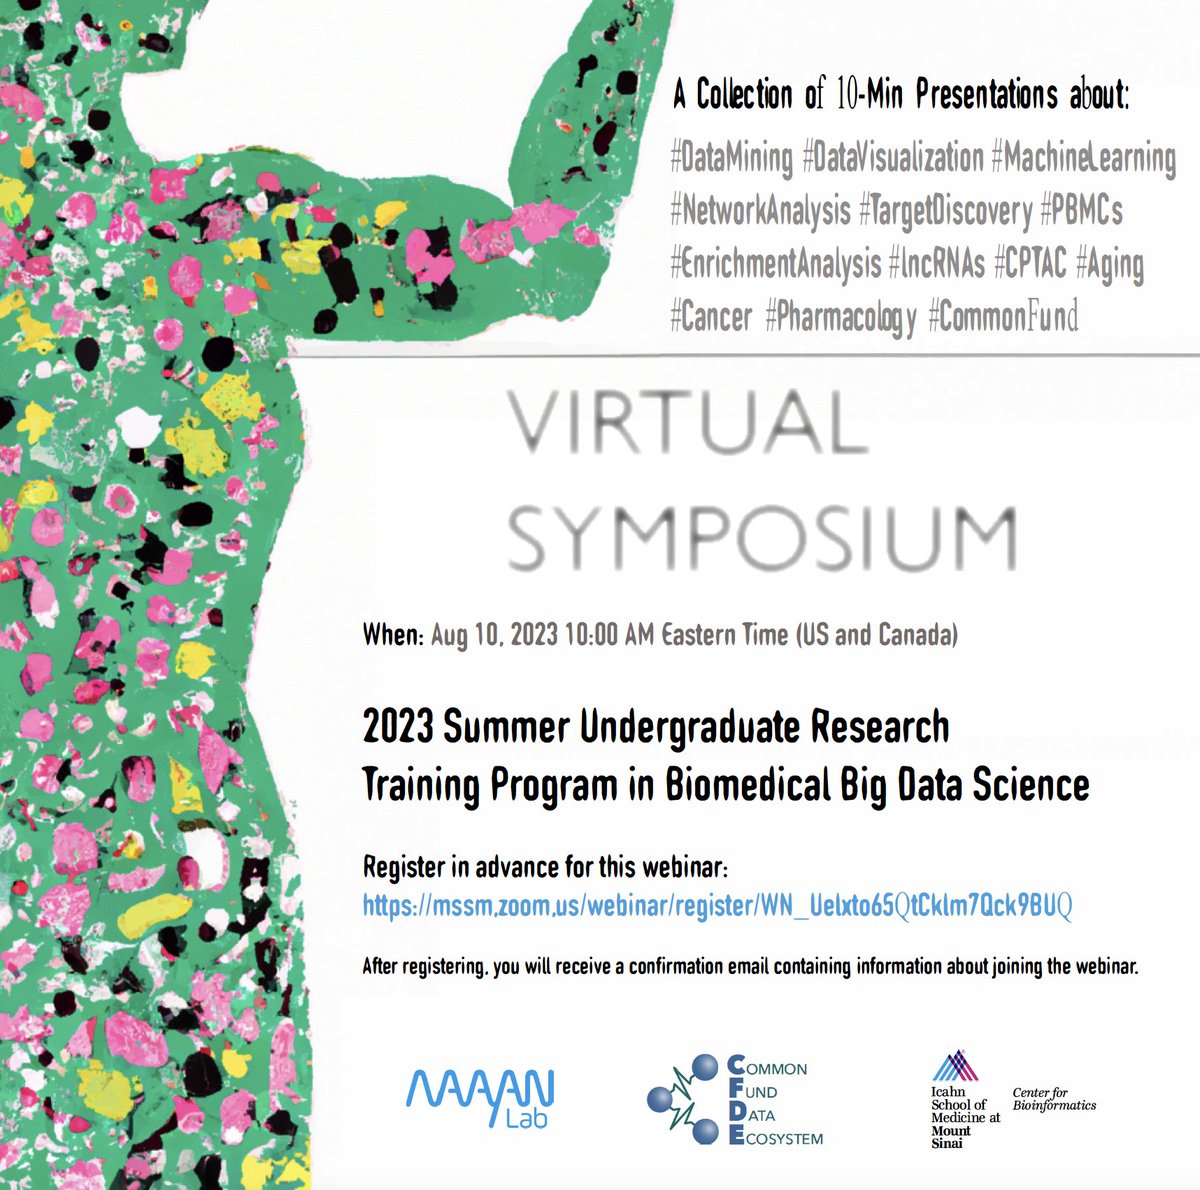 Join the @MaayanLab Virtual Symposium 8/10 @ 10 AM ET where our trainees in the Summer Undergraduate Research Training Program in Biomedical Big #DataScience will present their research projects. Register: mssm.zoom.us/webinar/regist… #STEM #Bioinformatics #SystemsBiology #DataMining